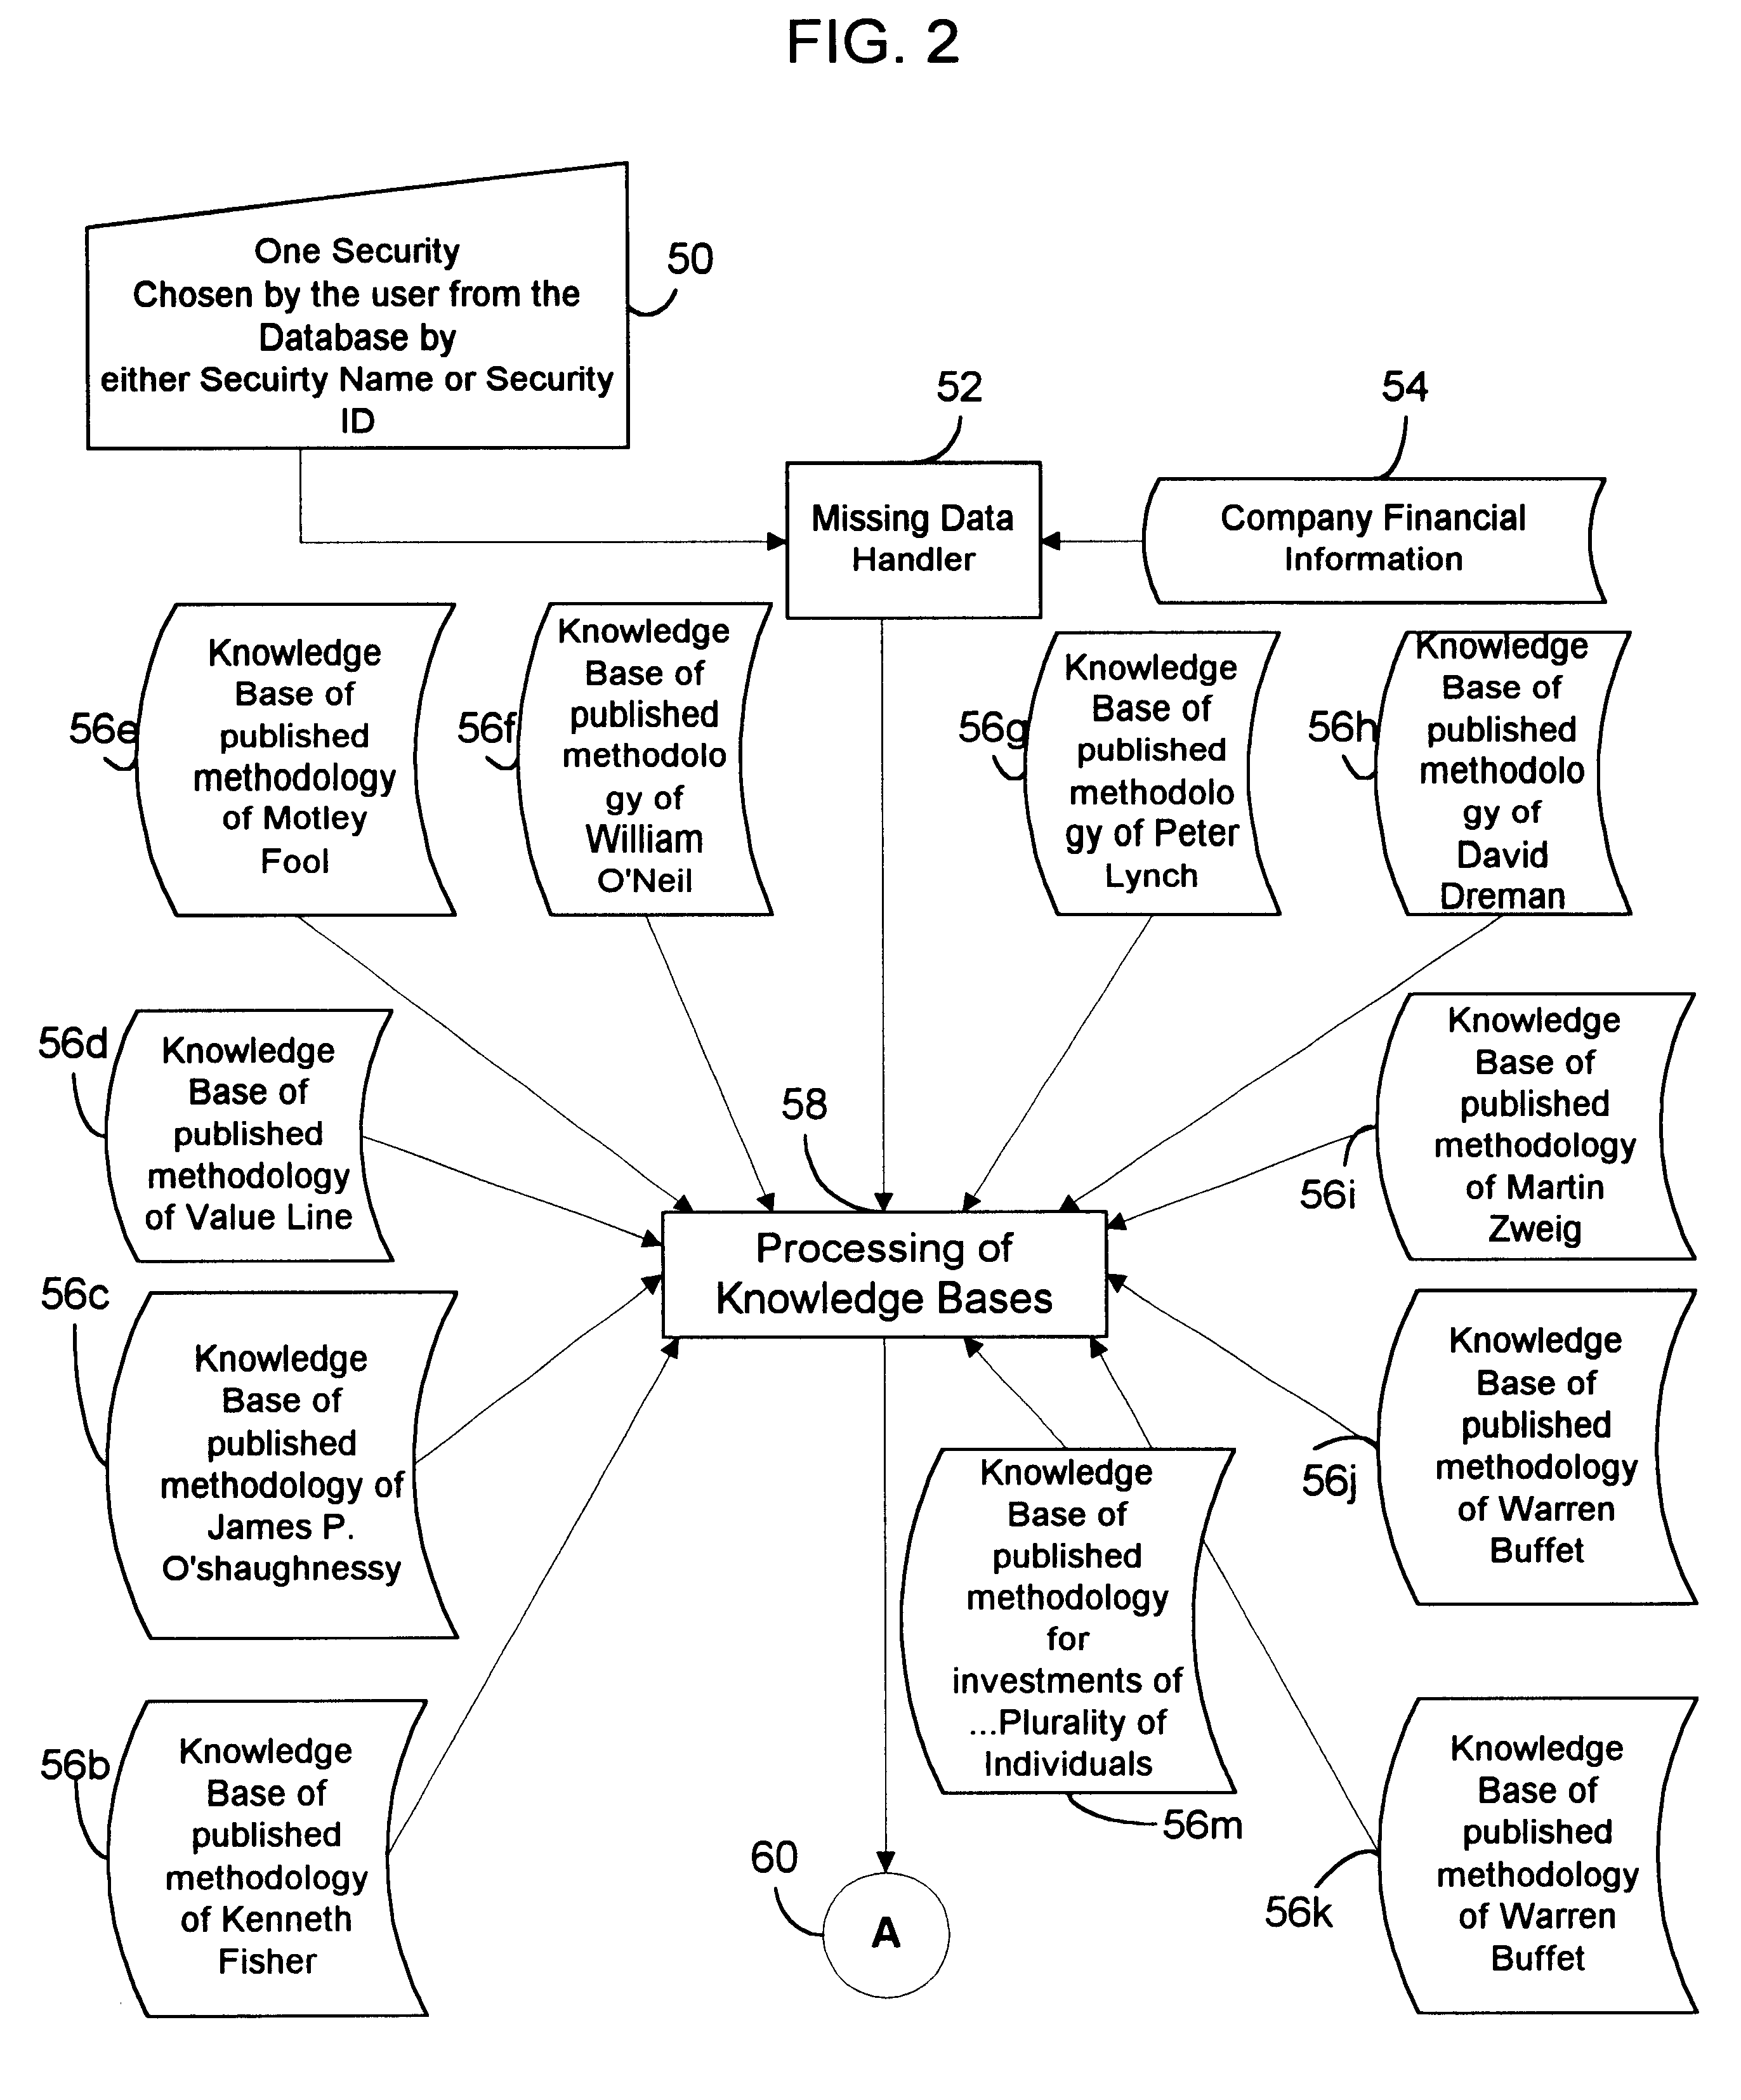 Computer based device to report the results of codified methodologies of financial advisors applied to a single security or element